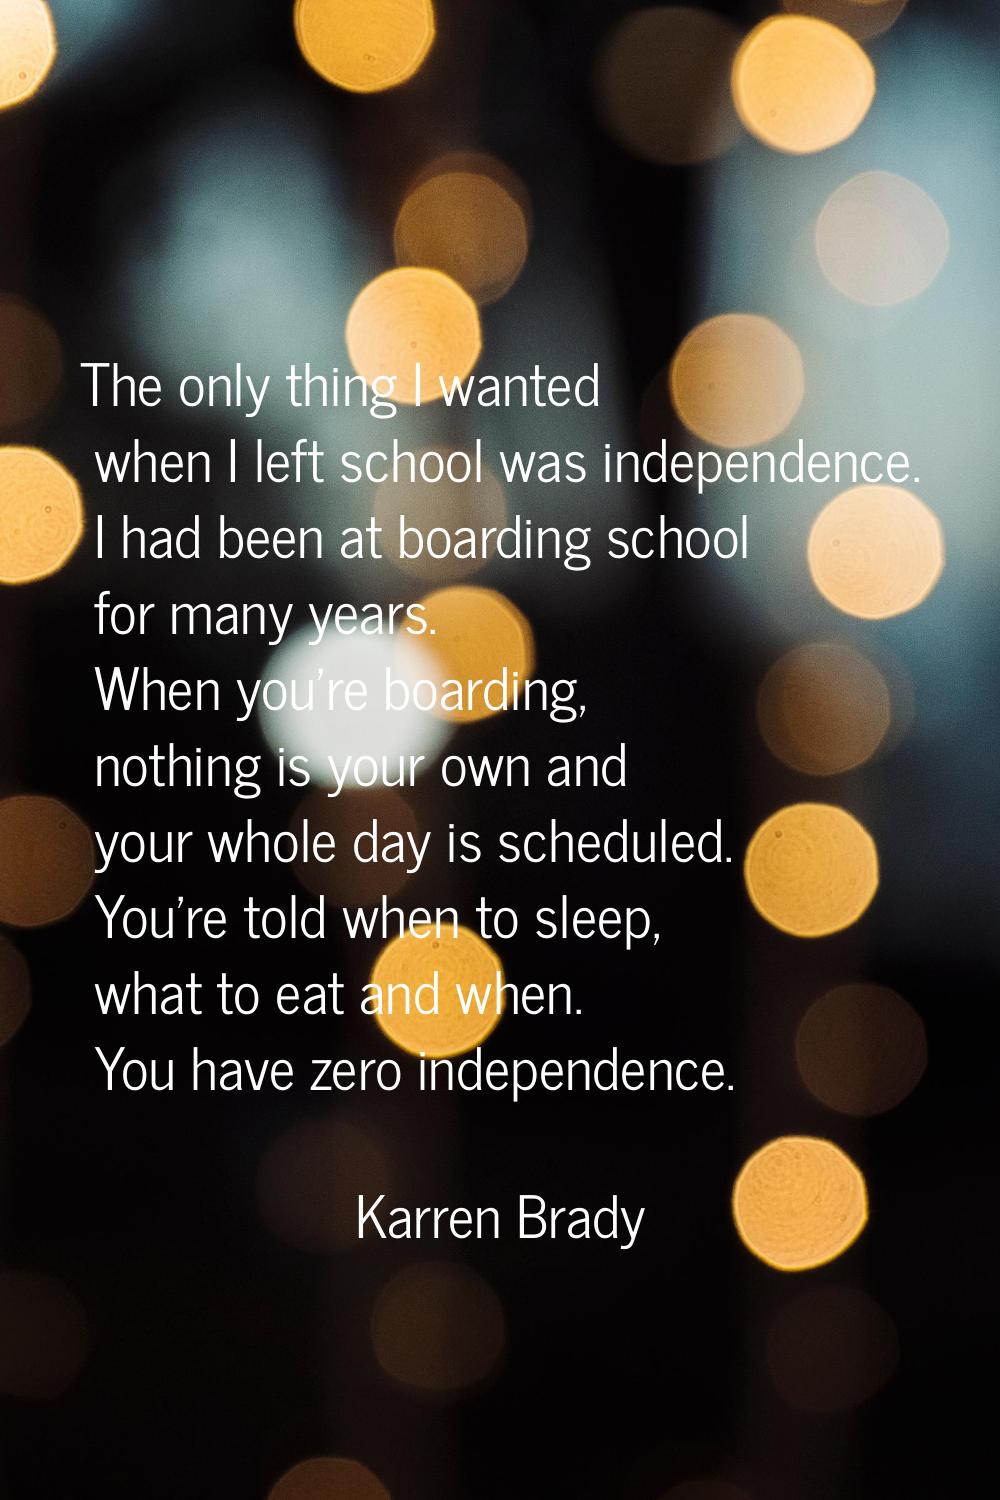 The only thing I wanted when I left school was independence. I had been at boarding school for many